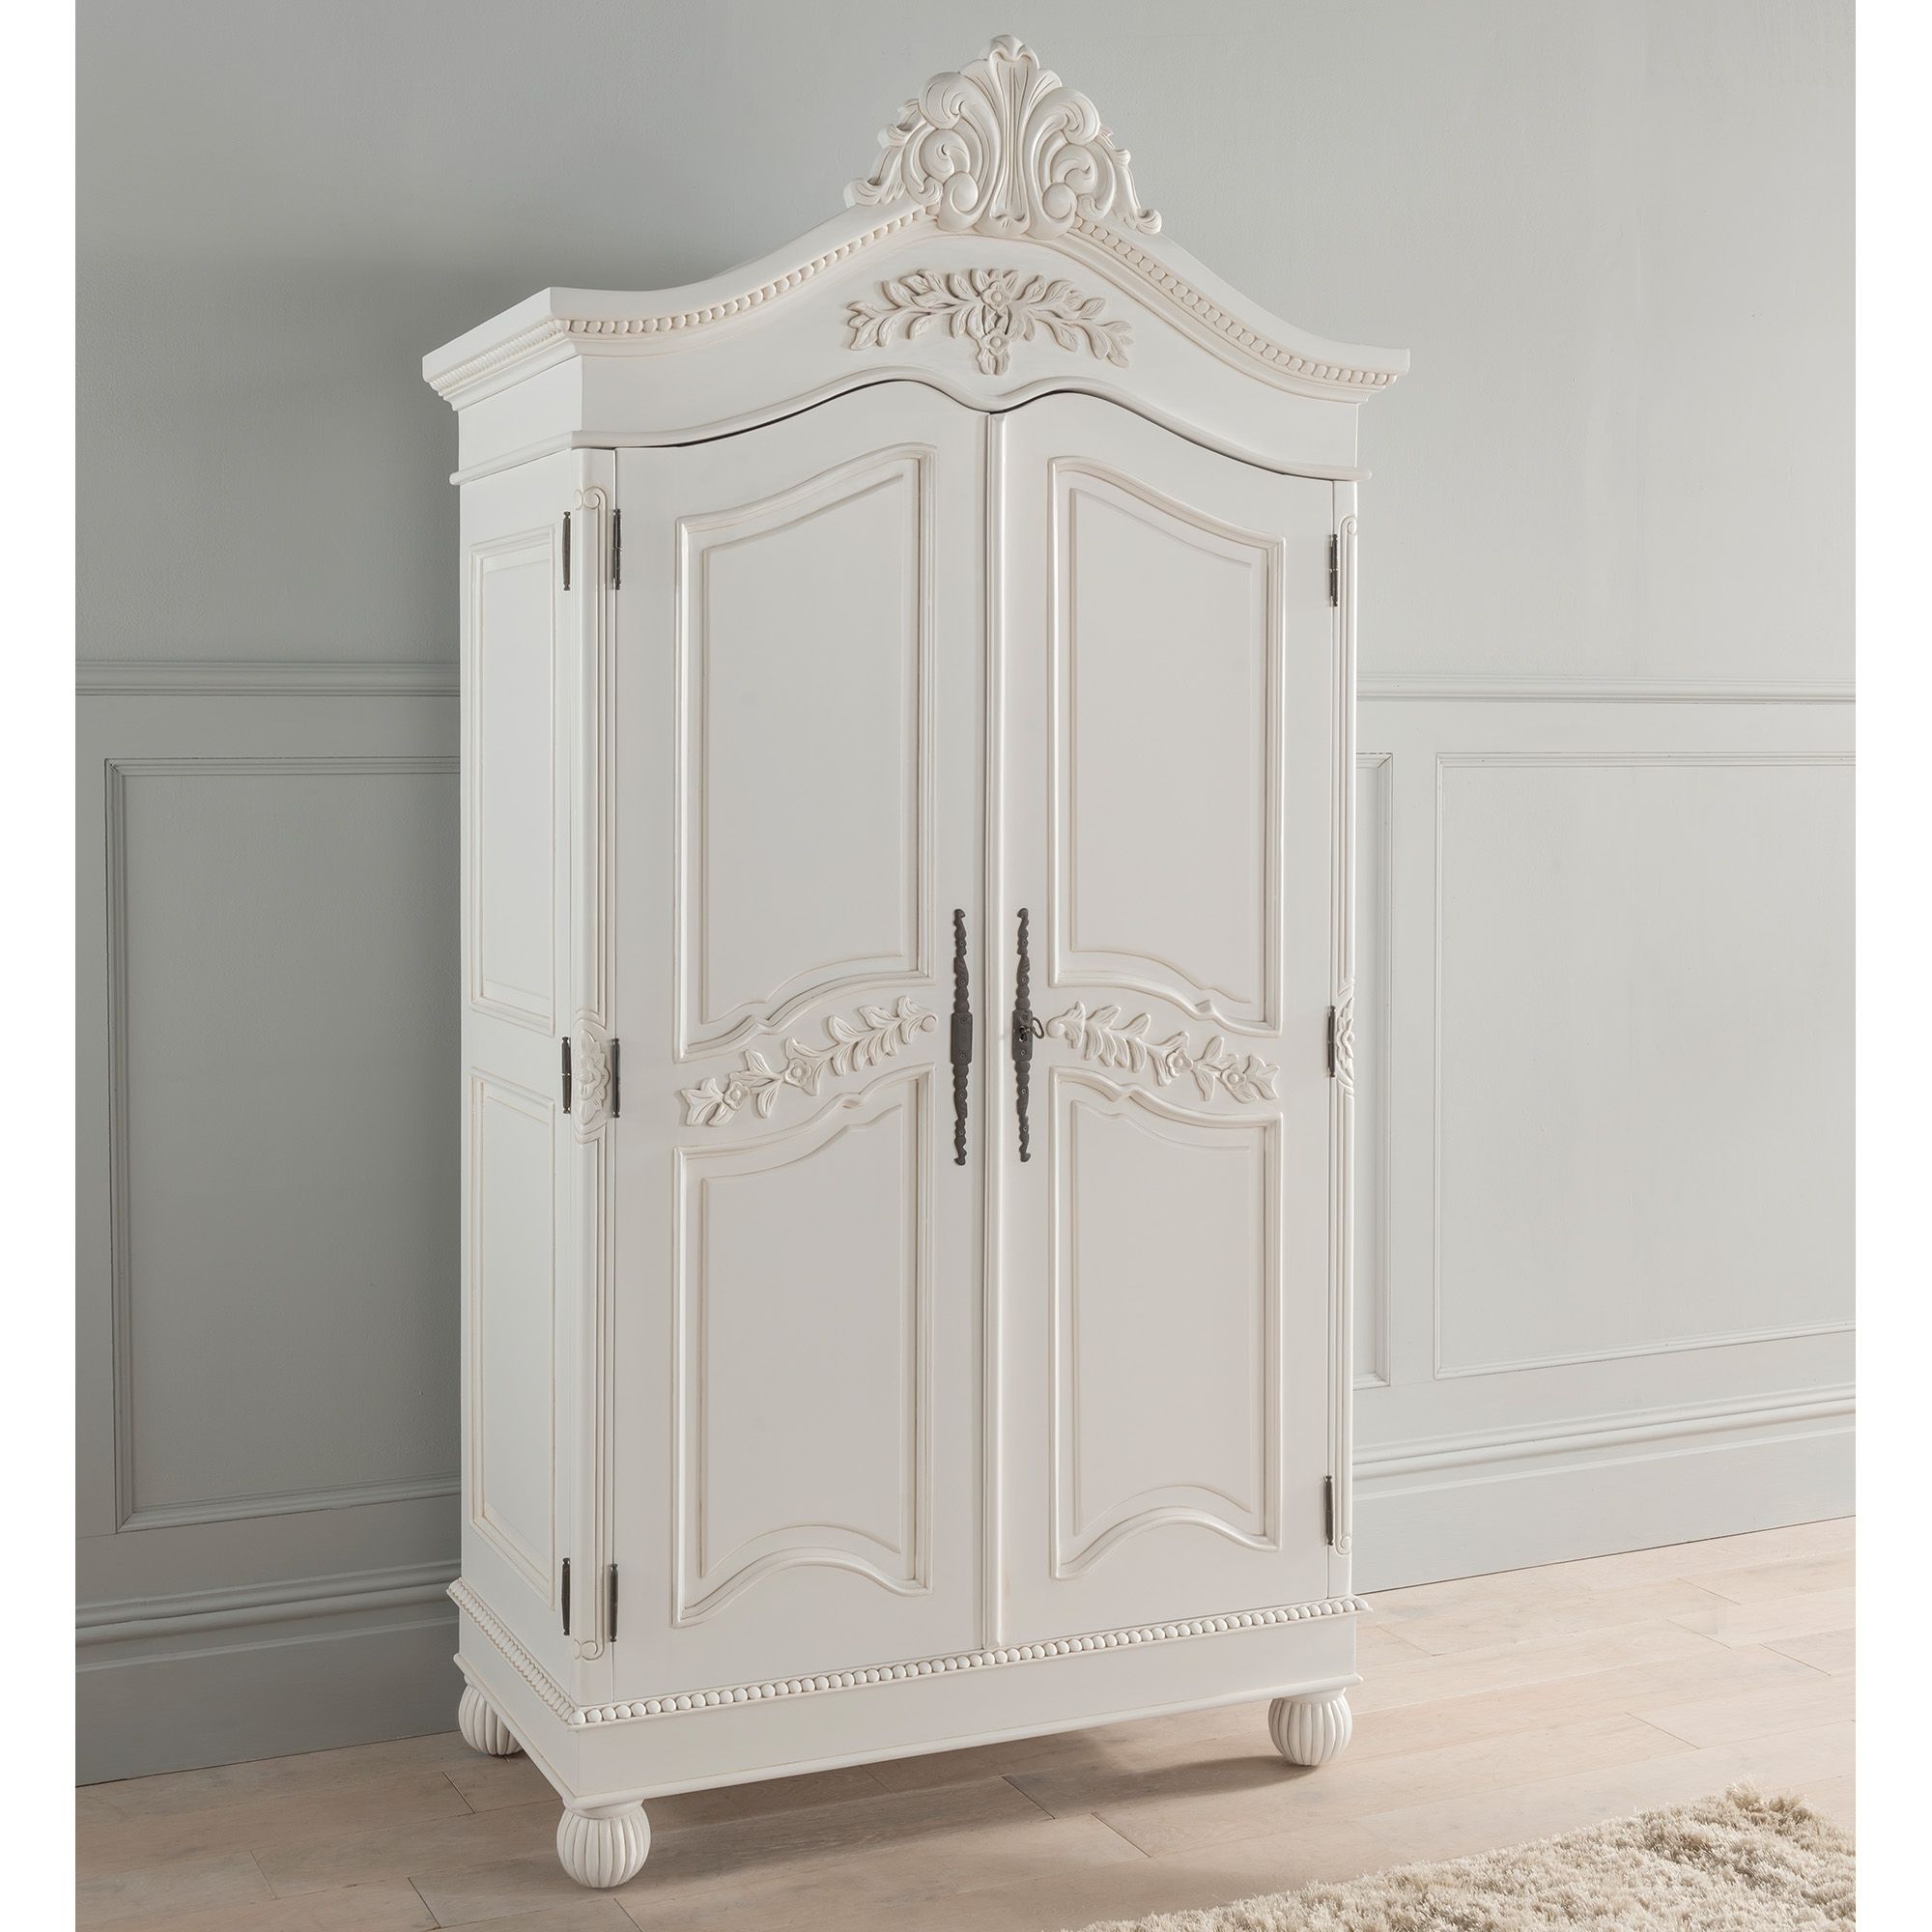 Antique French Style Wardrobe | Shabby Chic Bedroom Furniture With Regard To French Shabby Chic Wardrobes (Gallery 1 of 20)